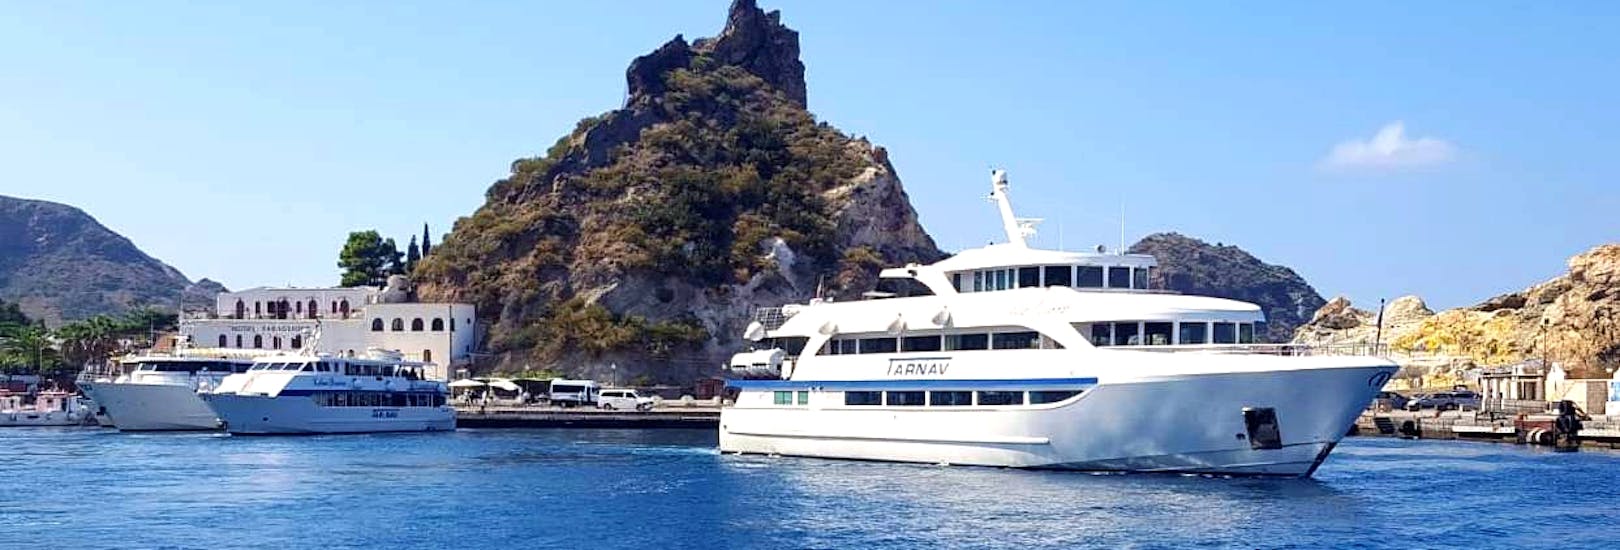 The Boat of Tarnav Tours Eolie during their Tour to the islands Vulcano, Panarea & Stromboli. 